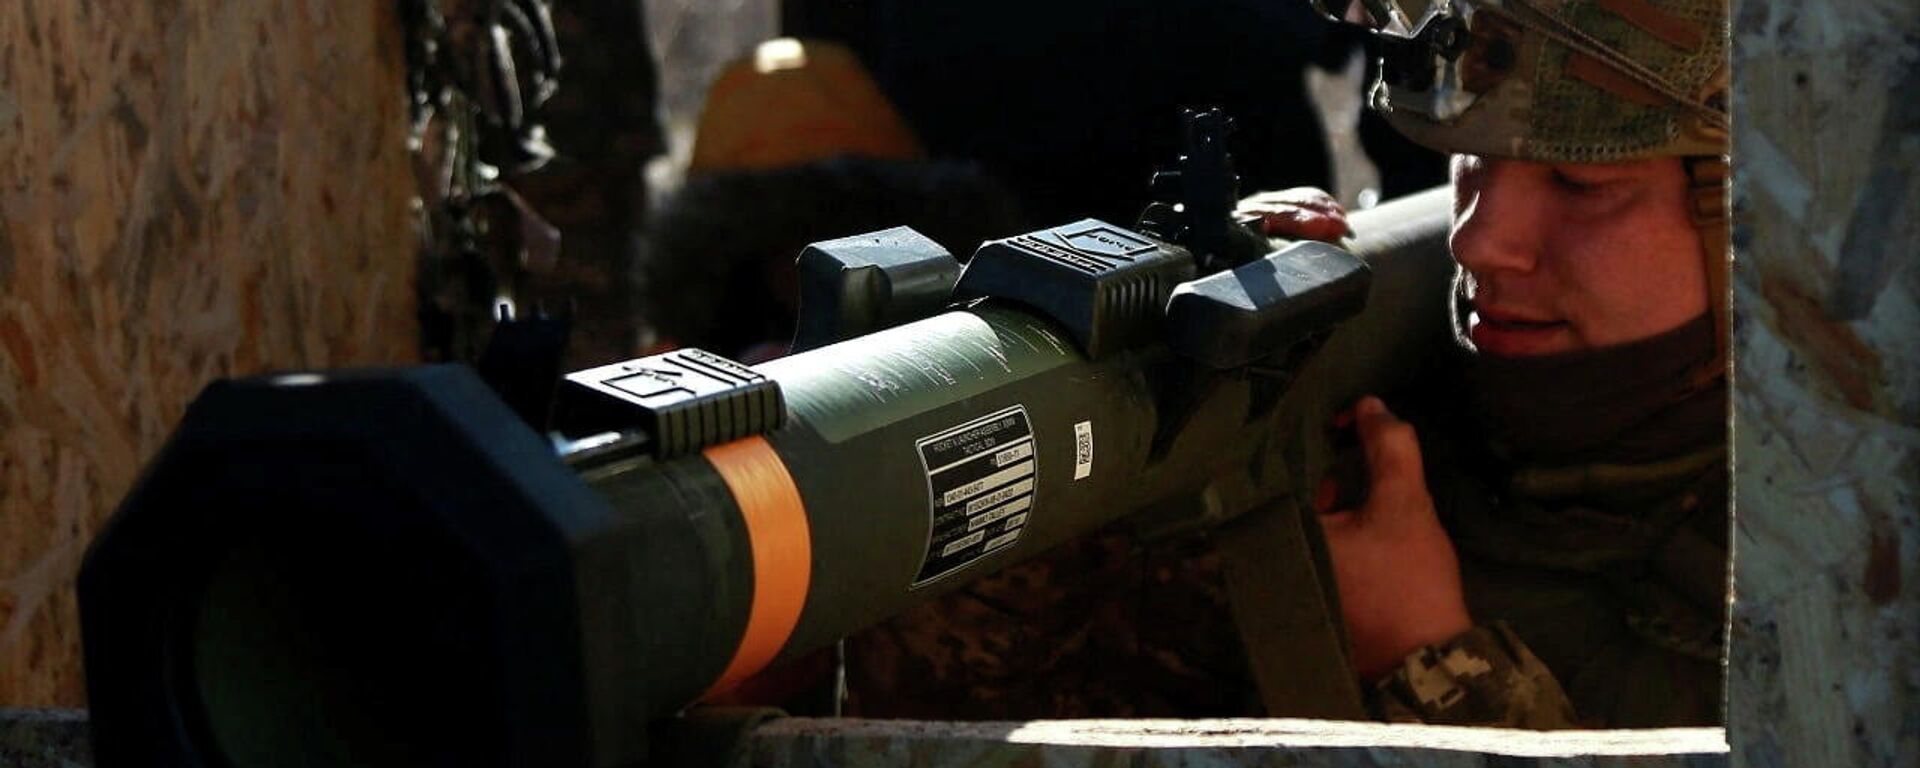 A service member of the Ukrainian Armed Forces levels a weapon during military drills at a firing ground in the Donetsk region, Ukraine, February 15, 2022. Picture taken February 15, 2022 - Sputnik International, 1920, 18.02.2022